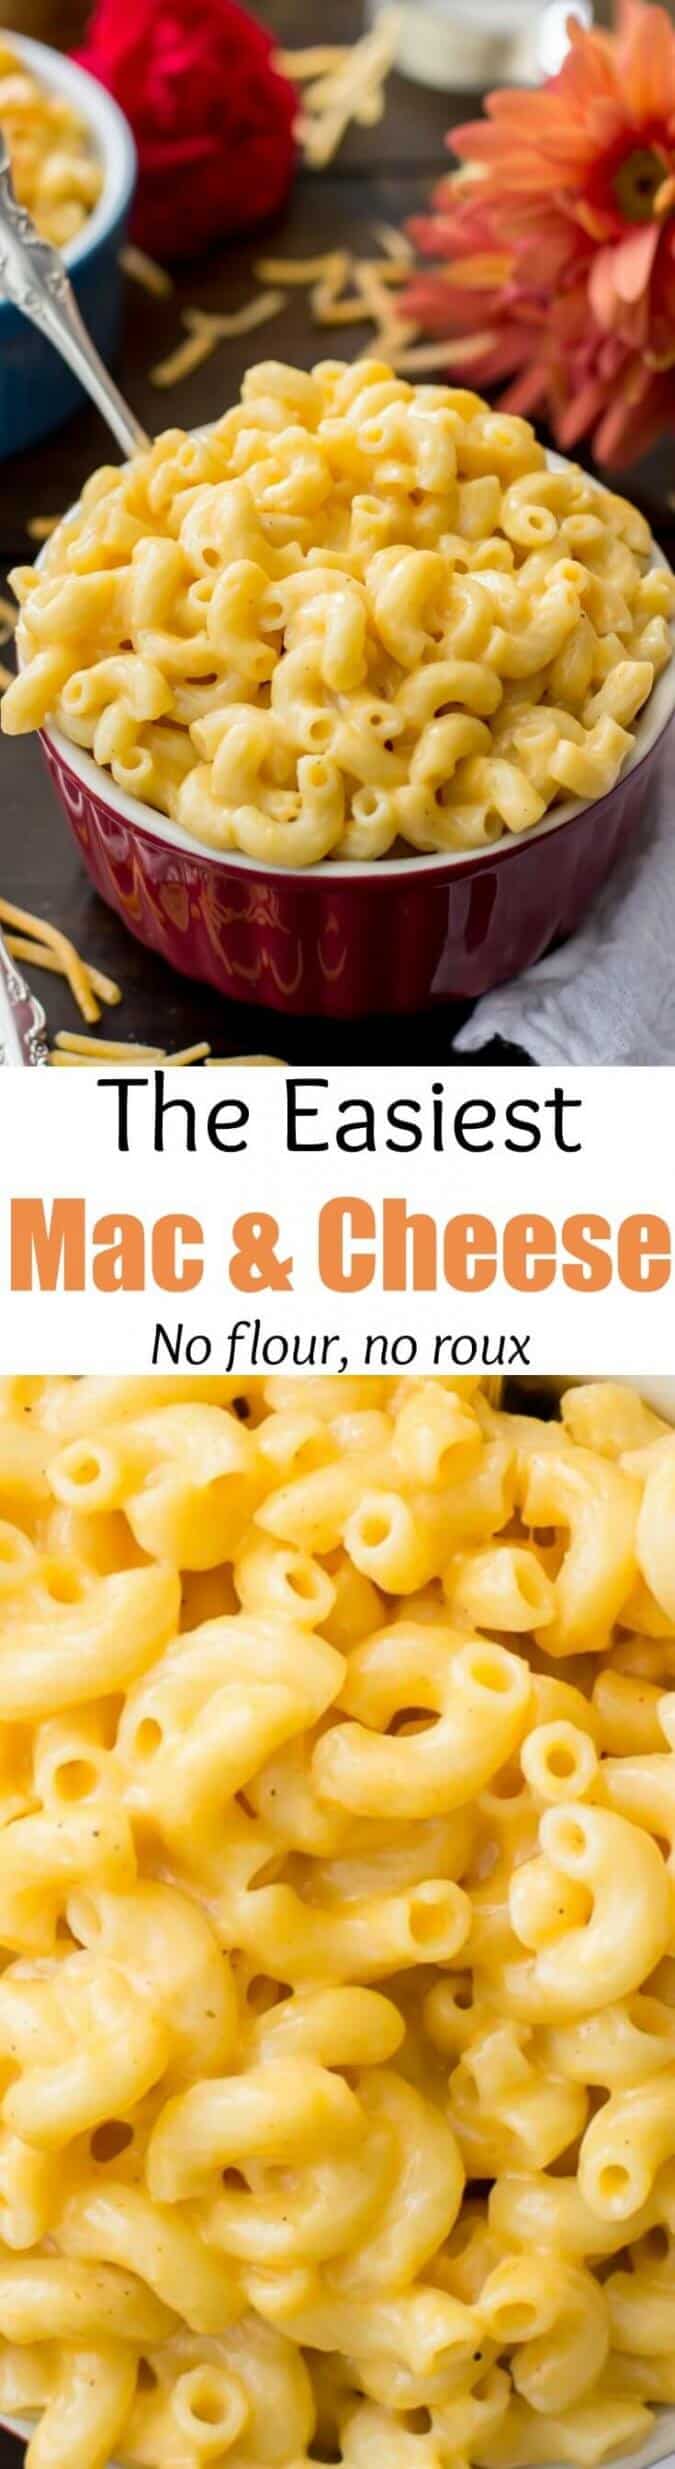 Easy Macaroni and Cheese made without flour or roux || Sugar Spun Run